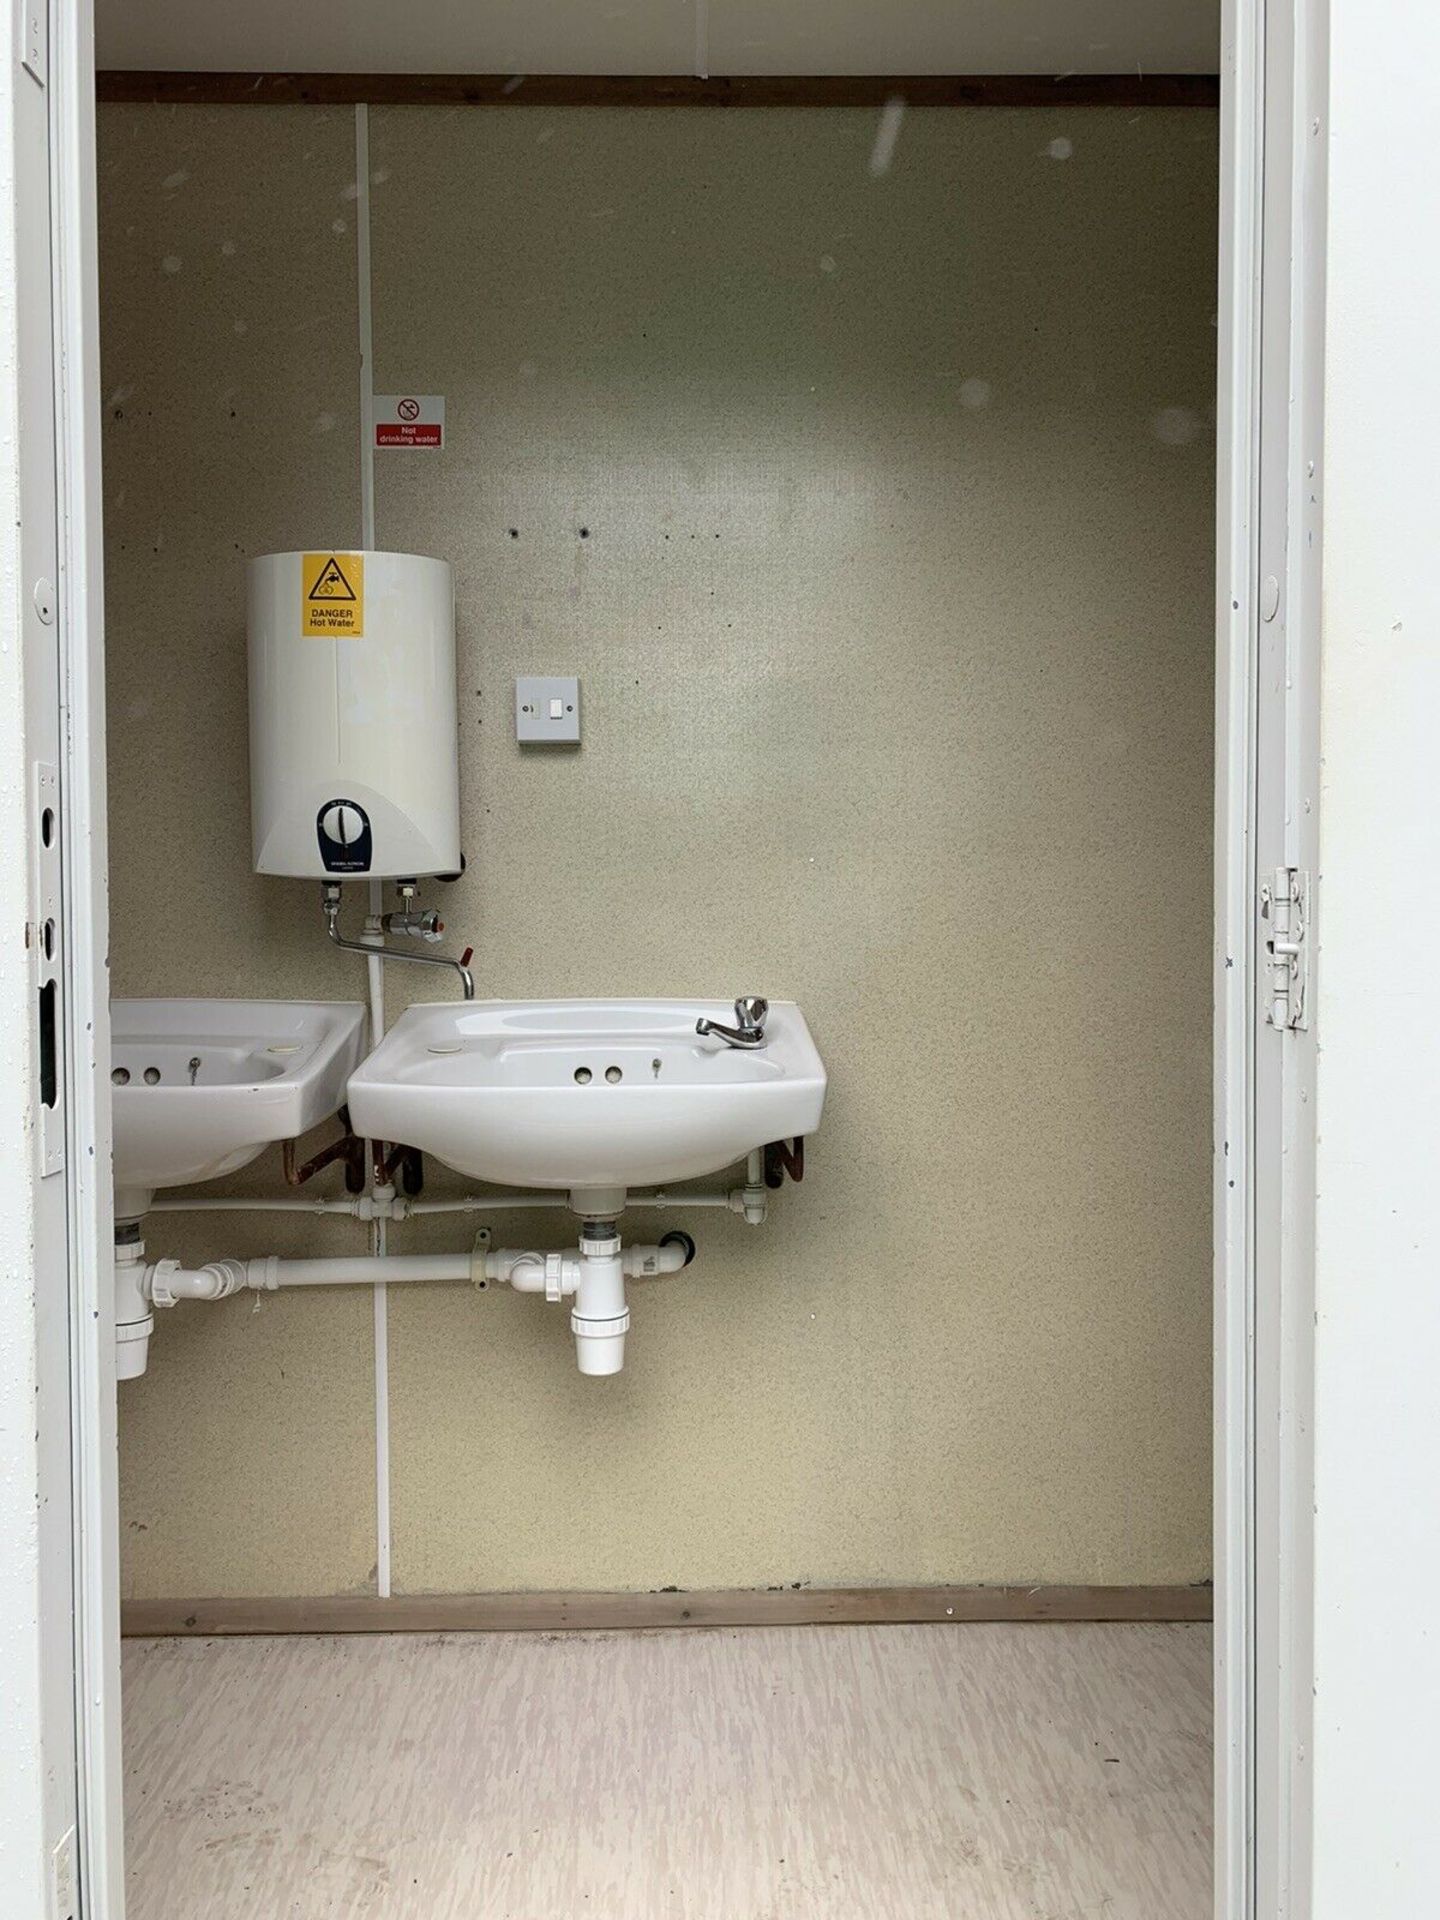 Portable Shower Drying Room With Toilets - Image 6 of 11